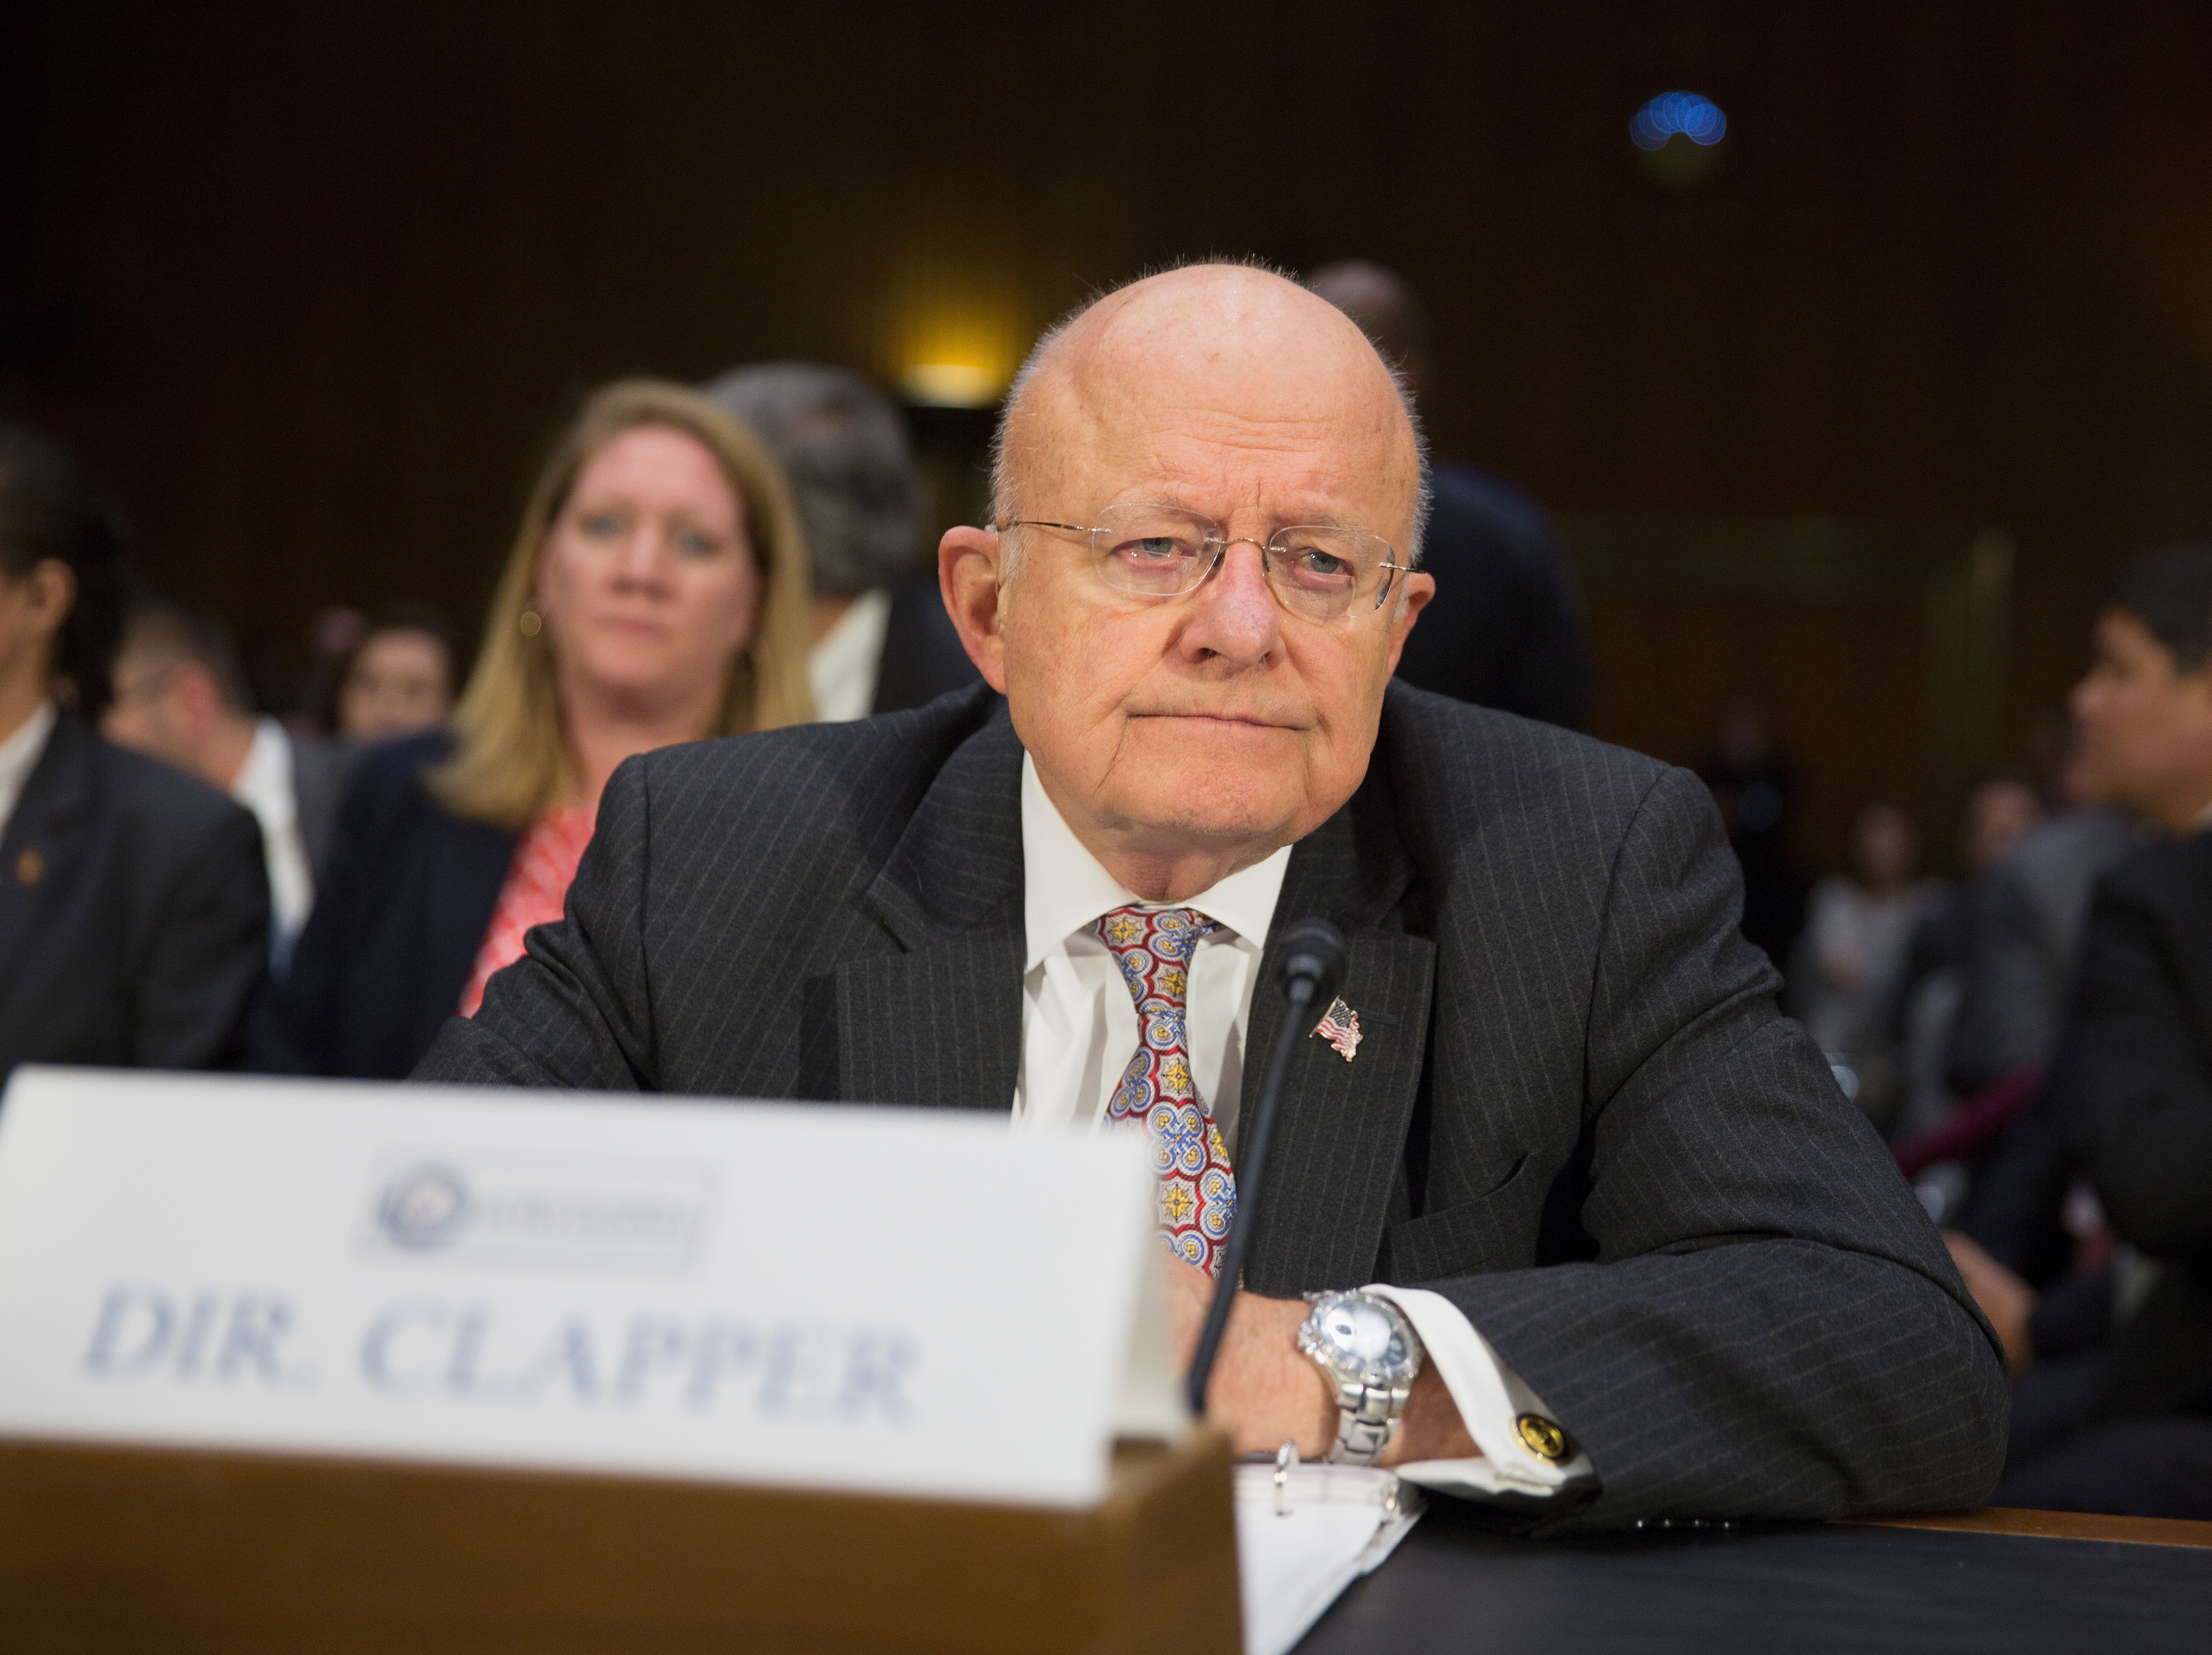 Former DNI James Clapper: 'I Can Deny' Wiretap of Trump Tower